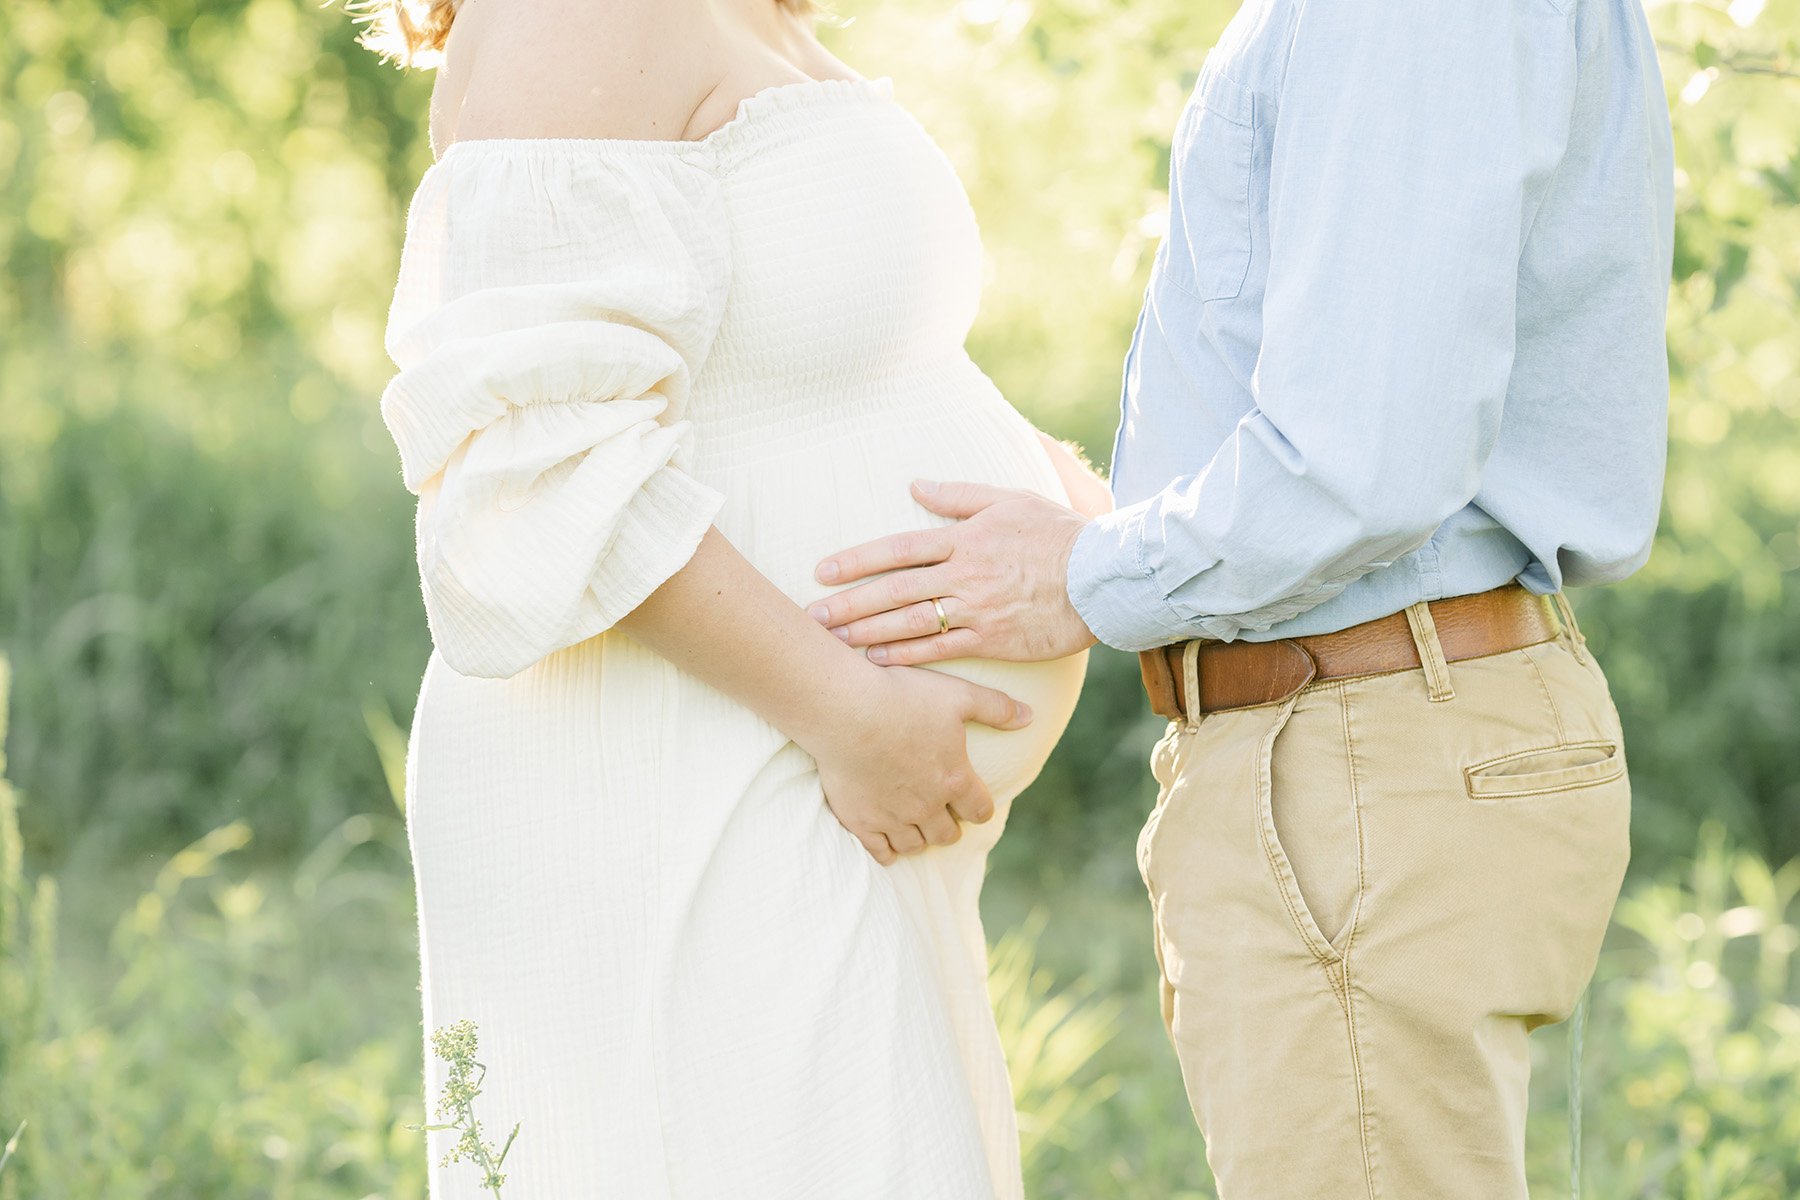 Maternity Photography  For The Love Of Photography